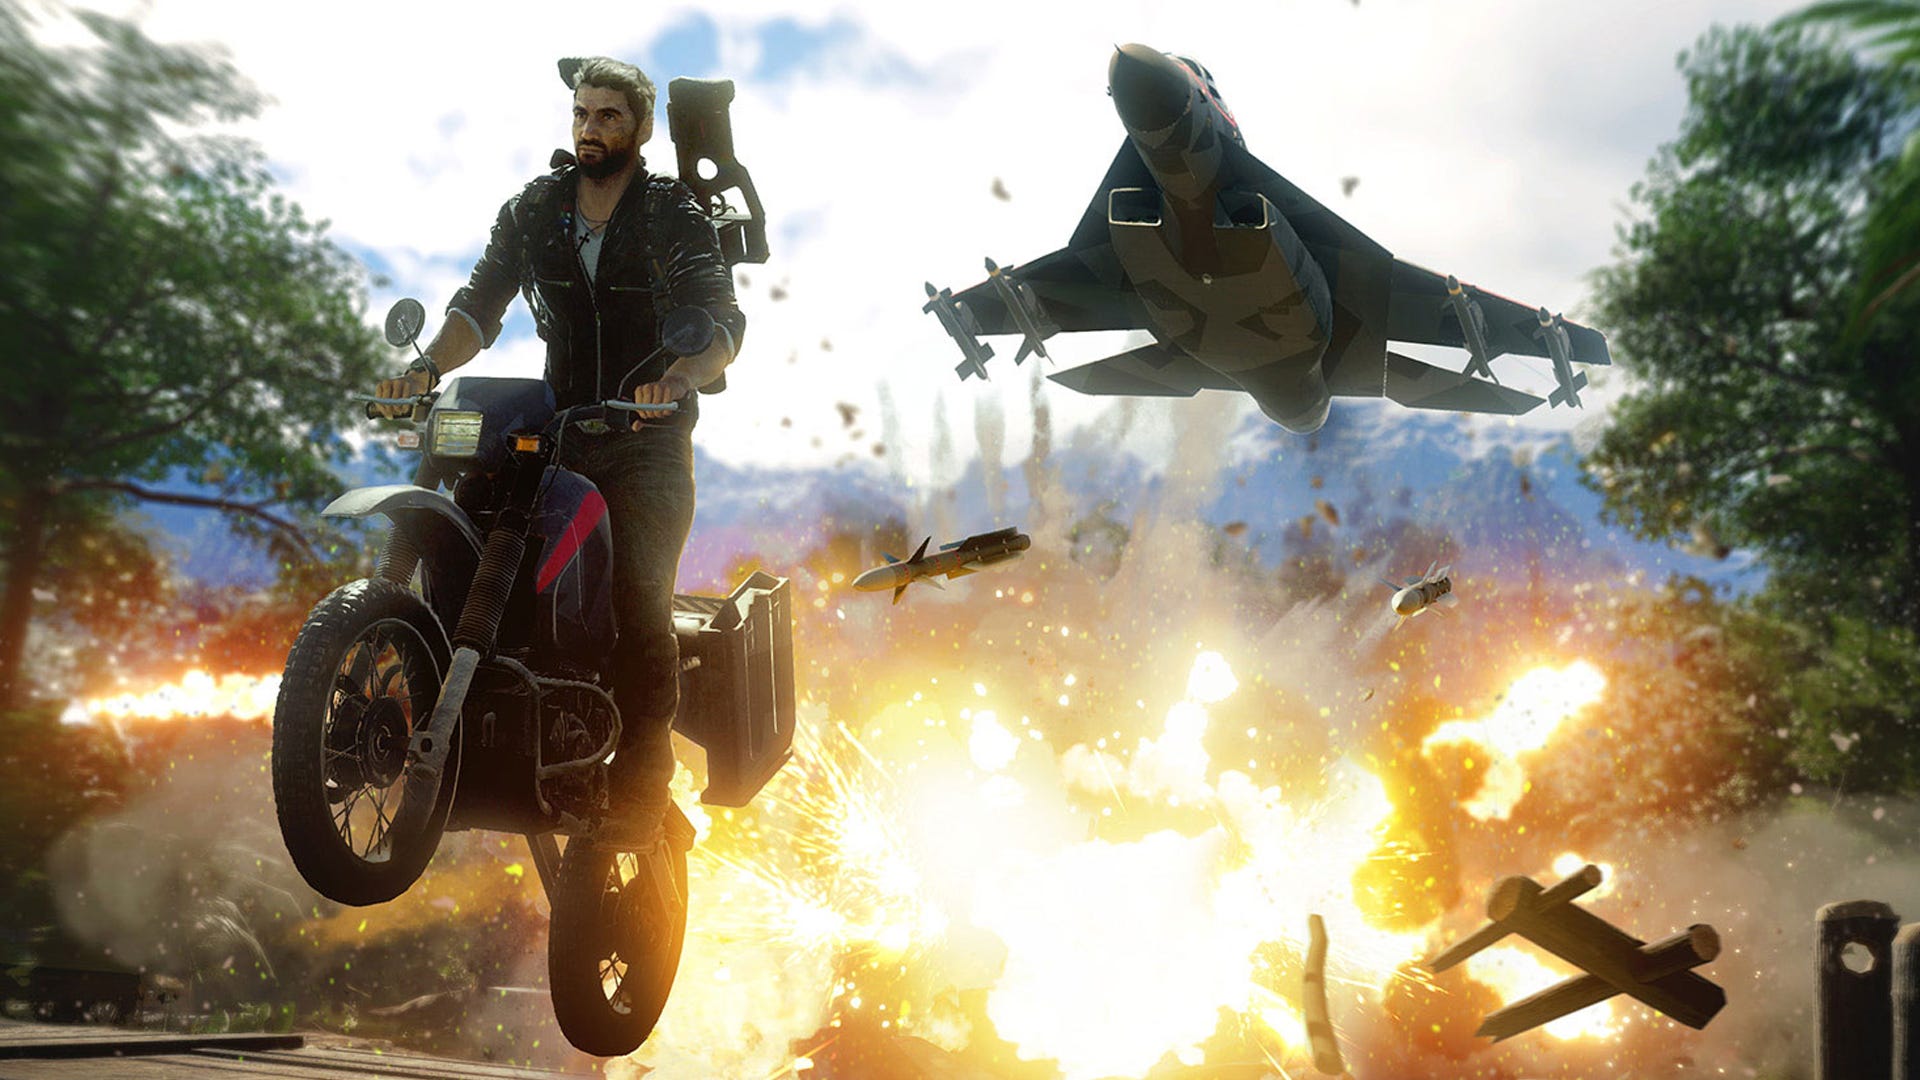 More Than 100 Employees at Avalanche, the Developer of Just Cause, Have Formed a Union